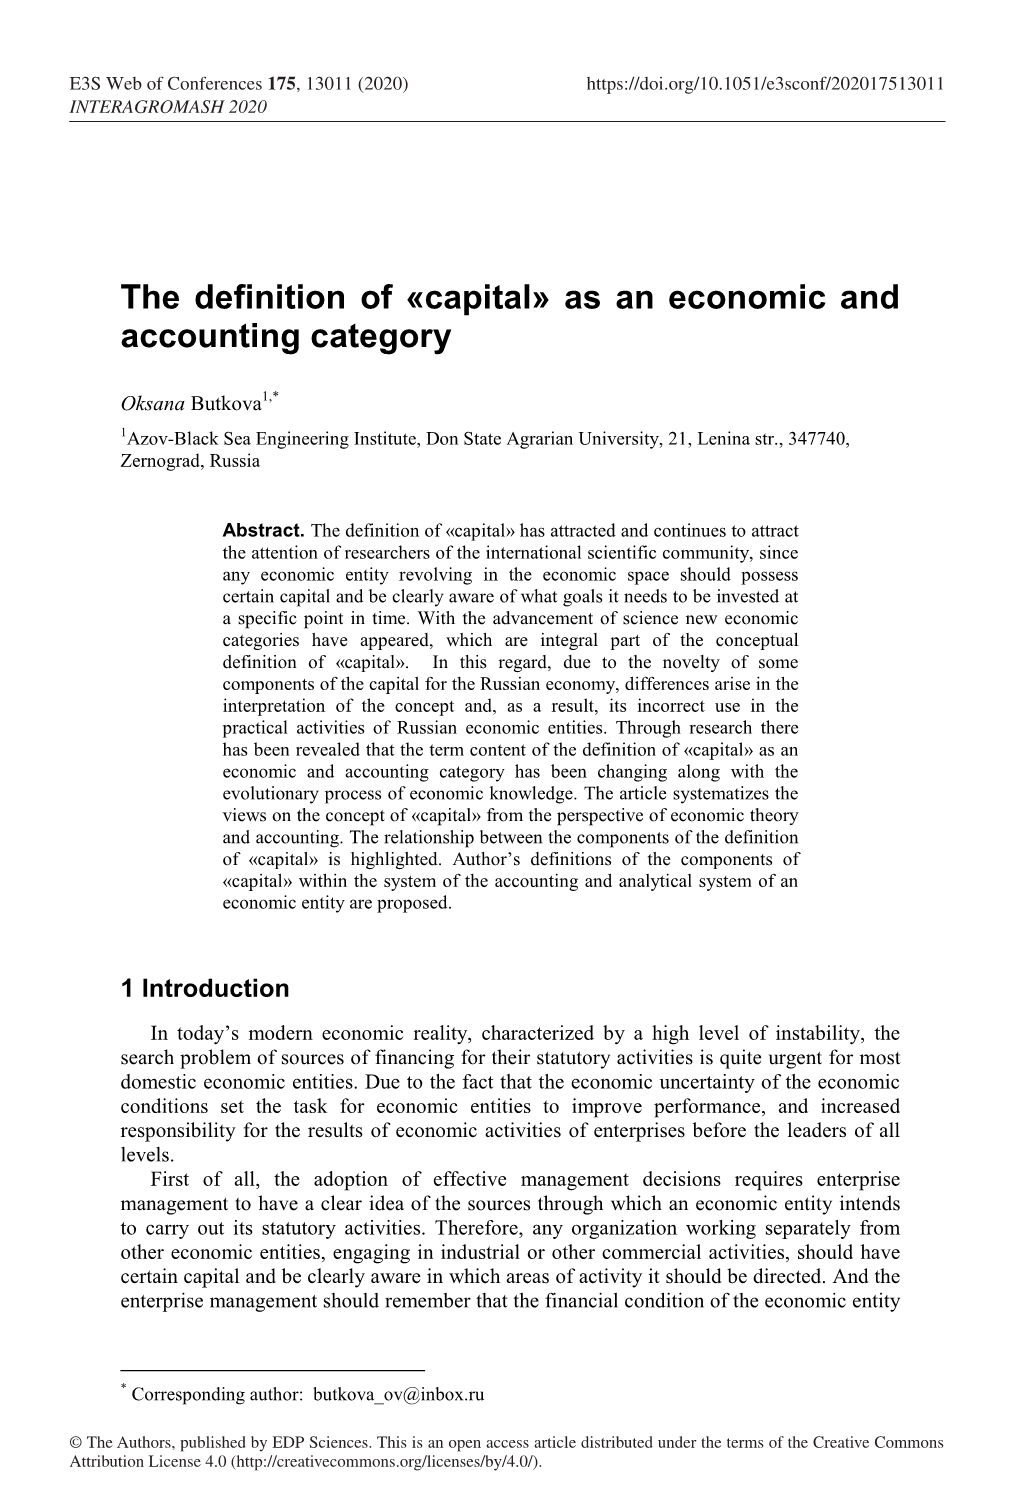 The Definition of «Capital» As an Economic and Accounting Category